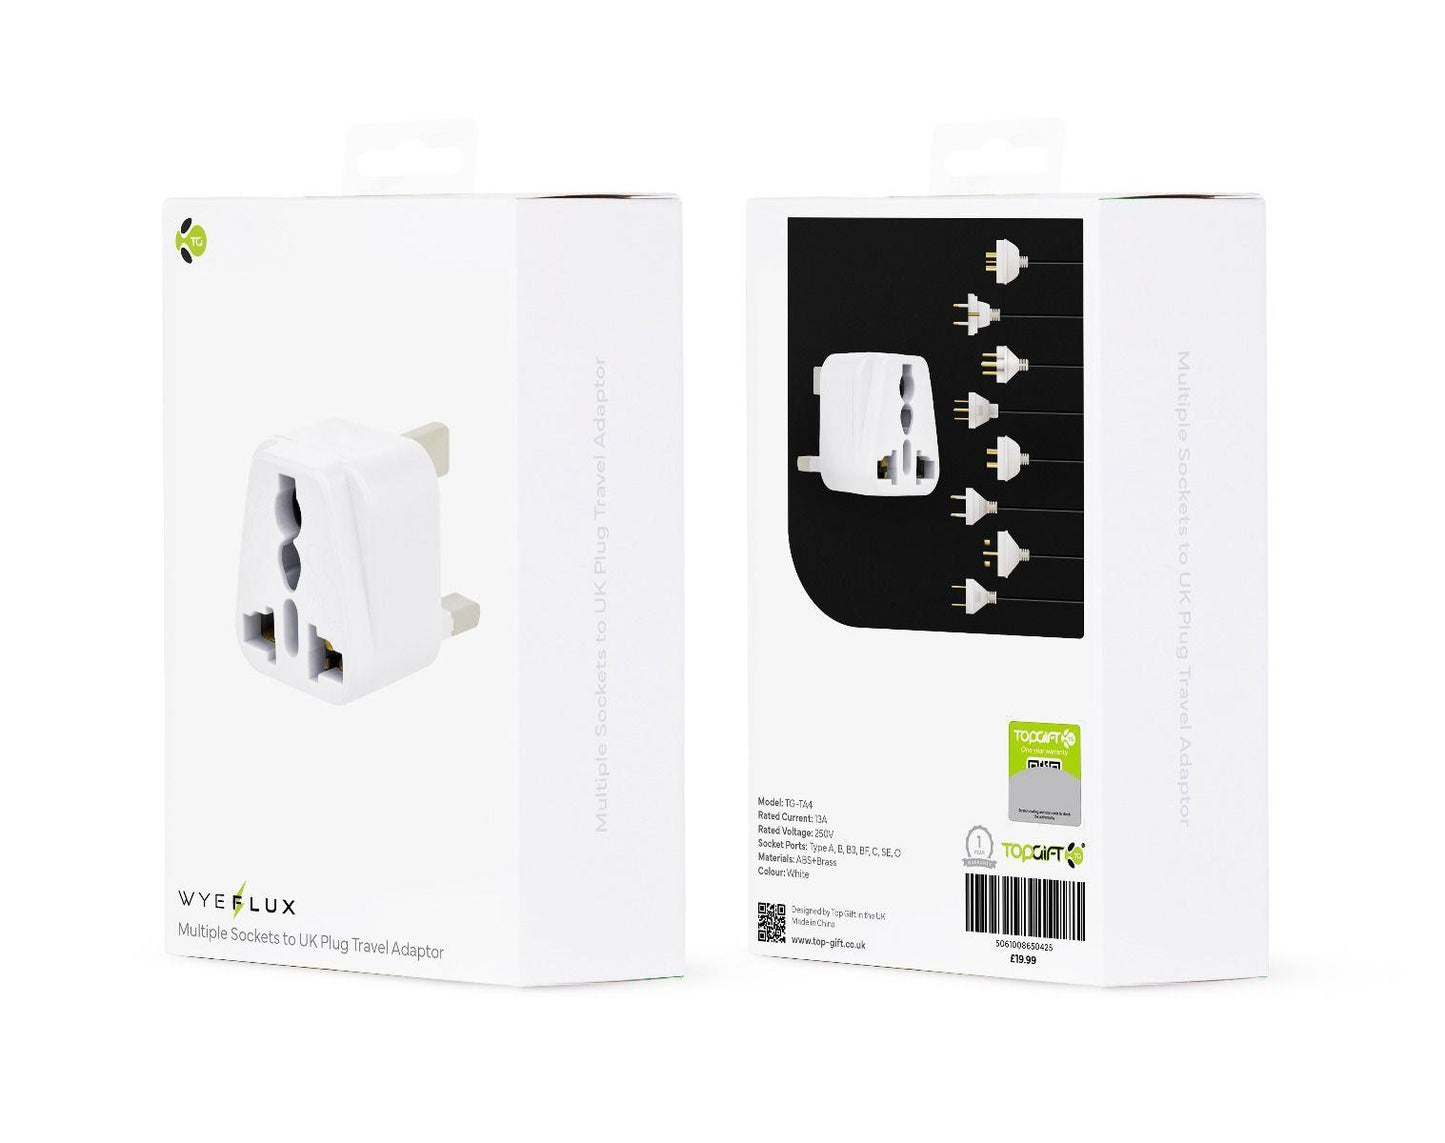 WYEFLUX Multiple Ports and Pins Universal Travel Adapter